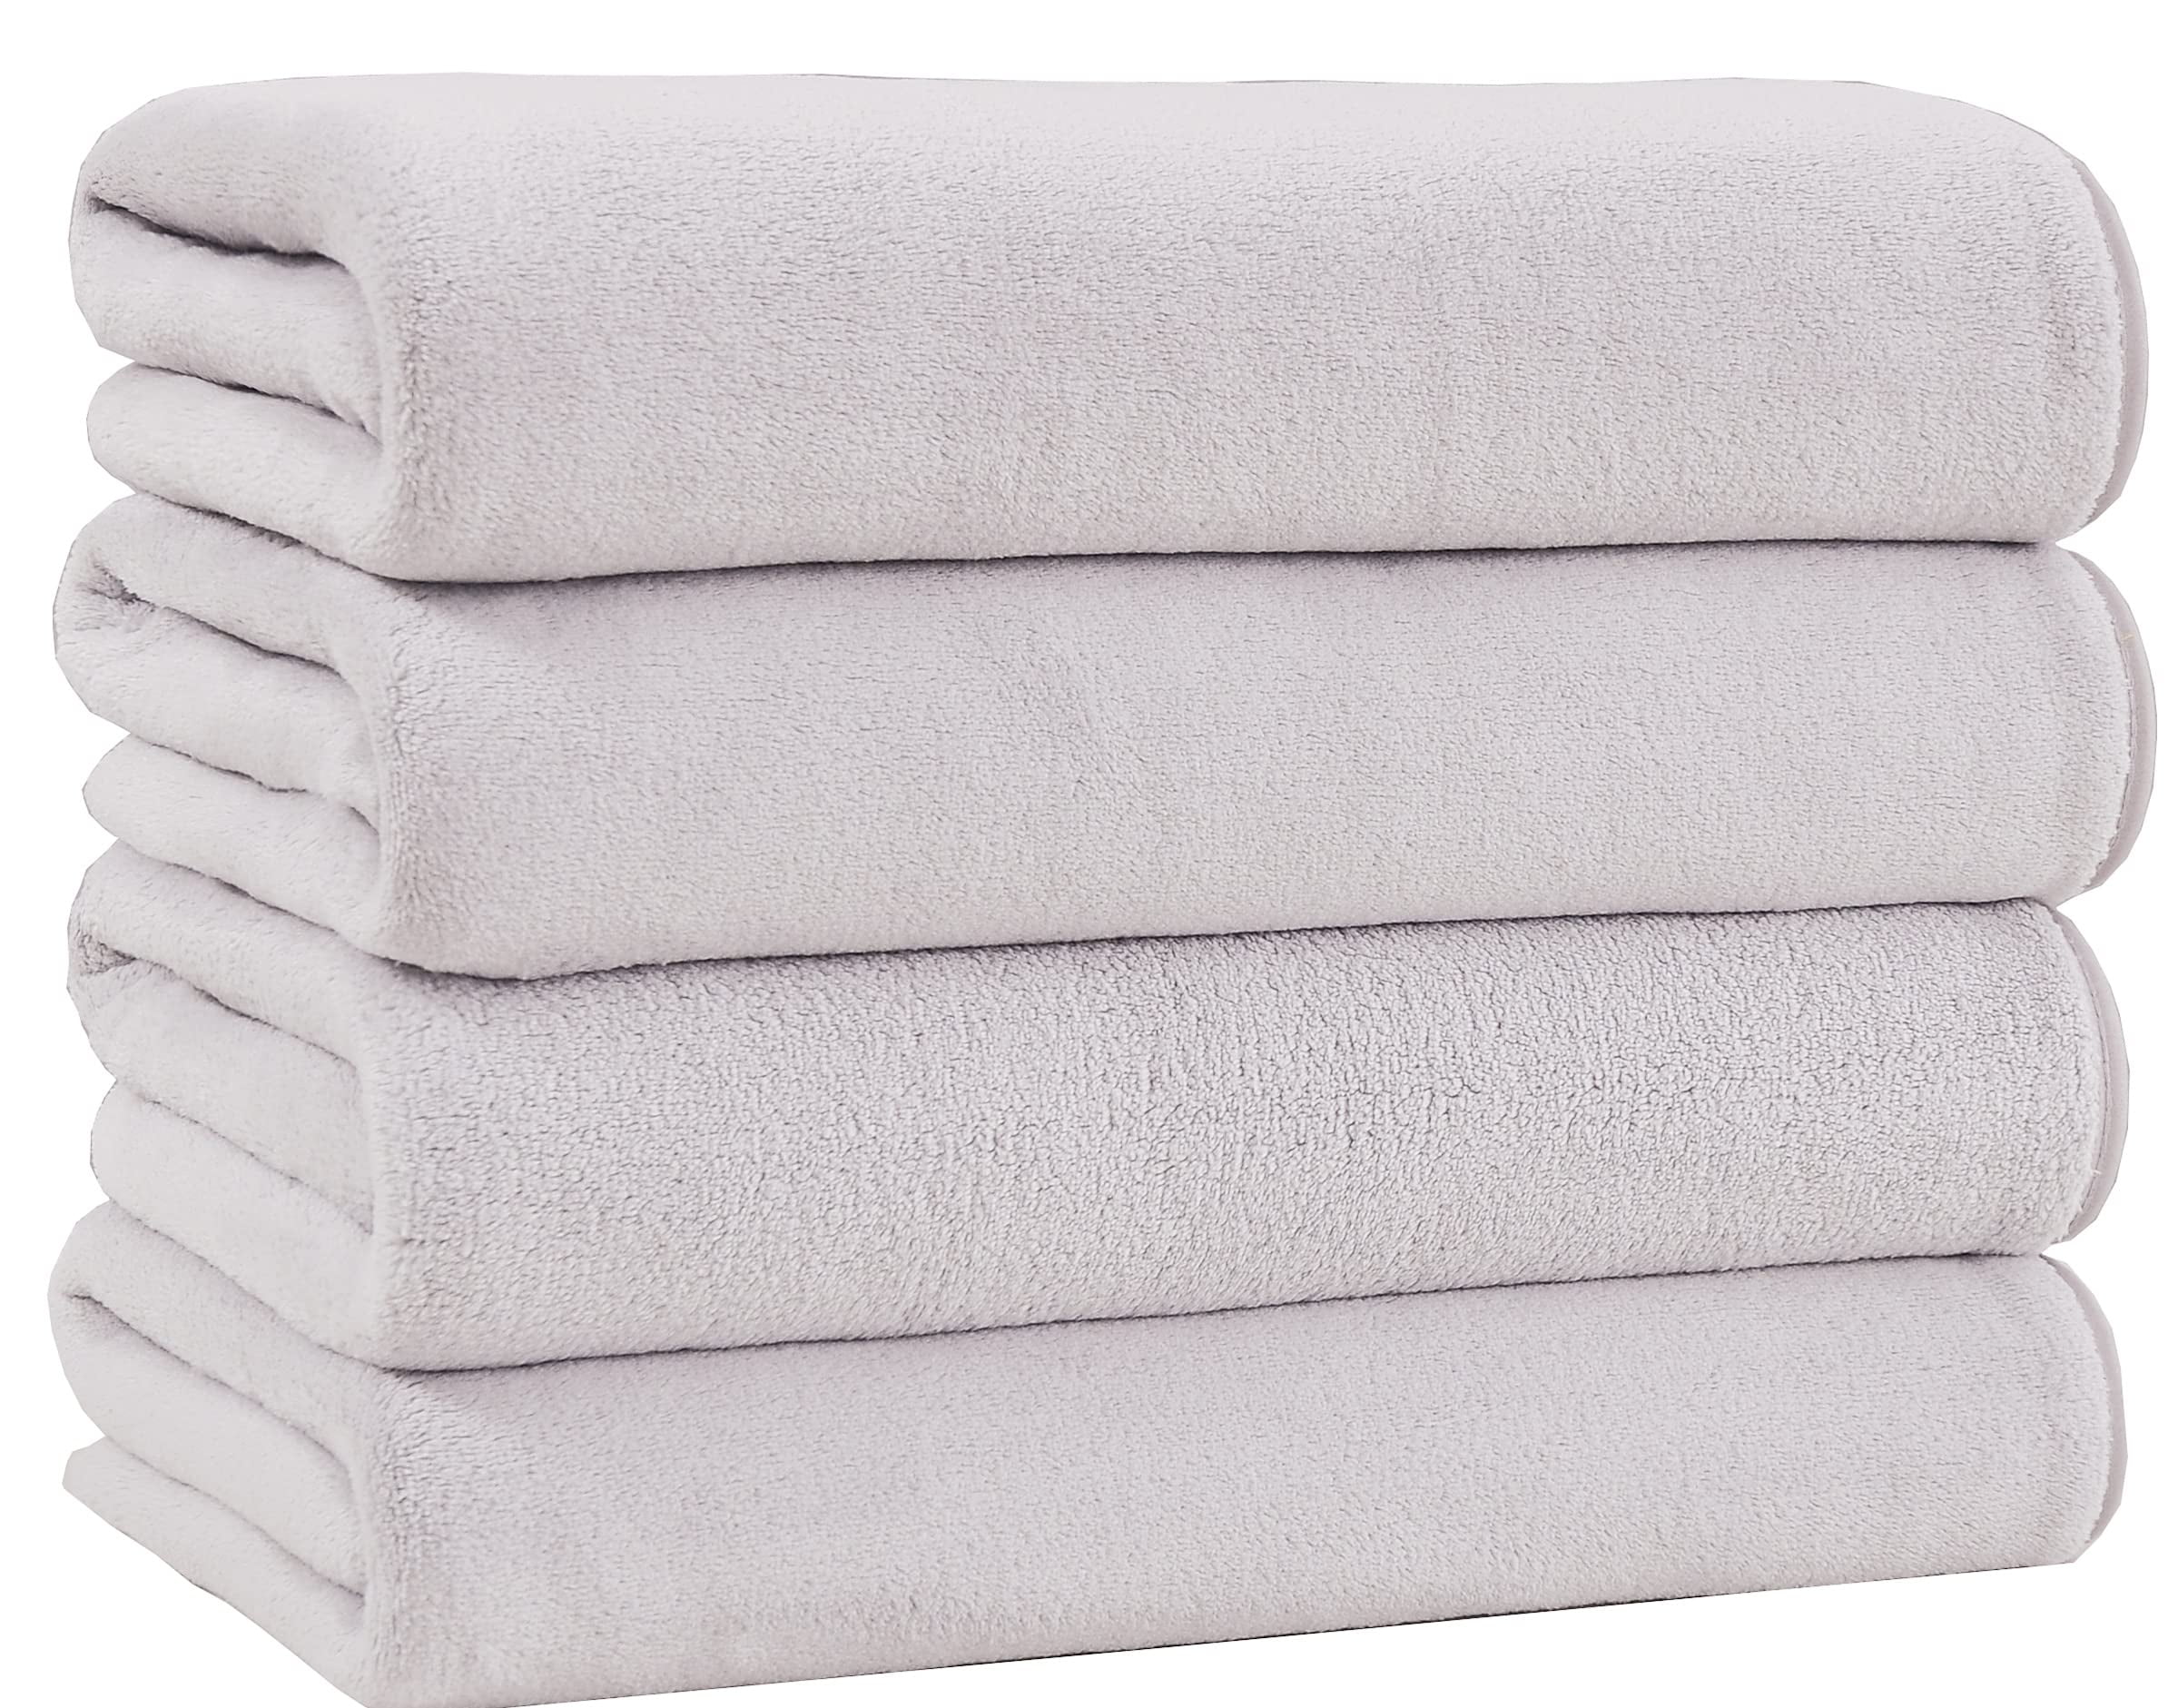 GraceAier Ultra Soft Bath Towels 4 Pack (28 x 56) - Quick Drying - -  Microfiber Coral Velvet Highly Absorbent Towel for Bath Fitness, Bathroom